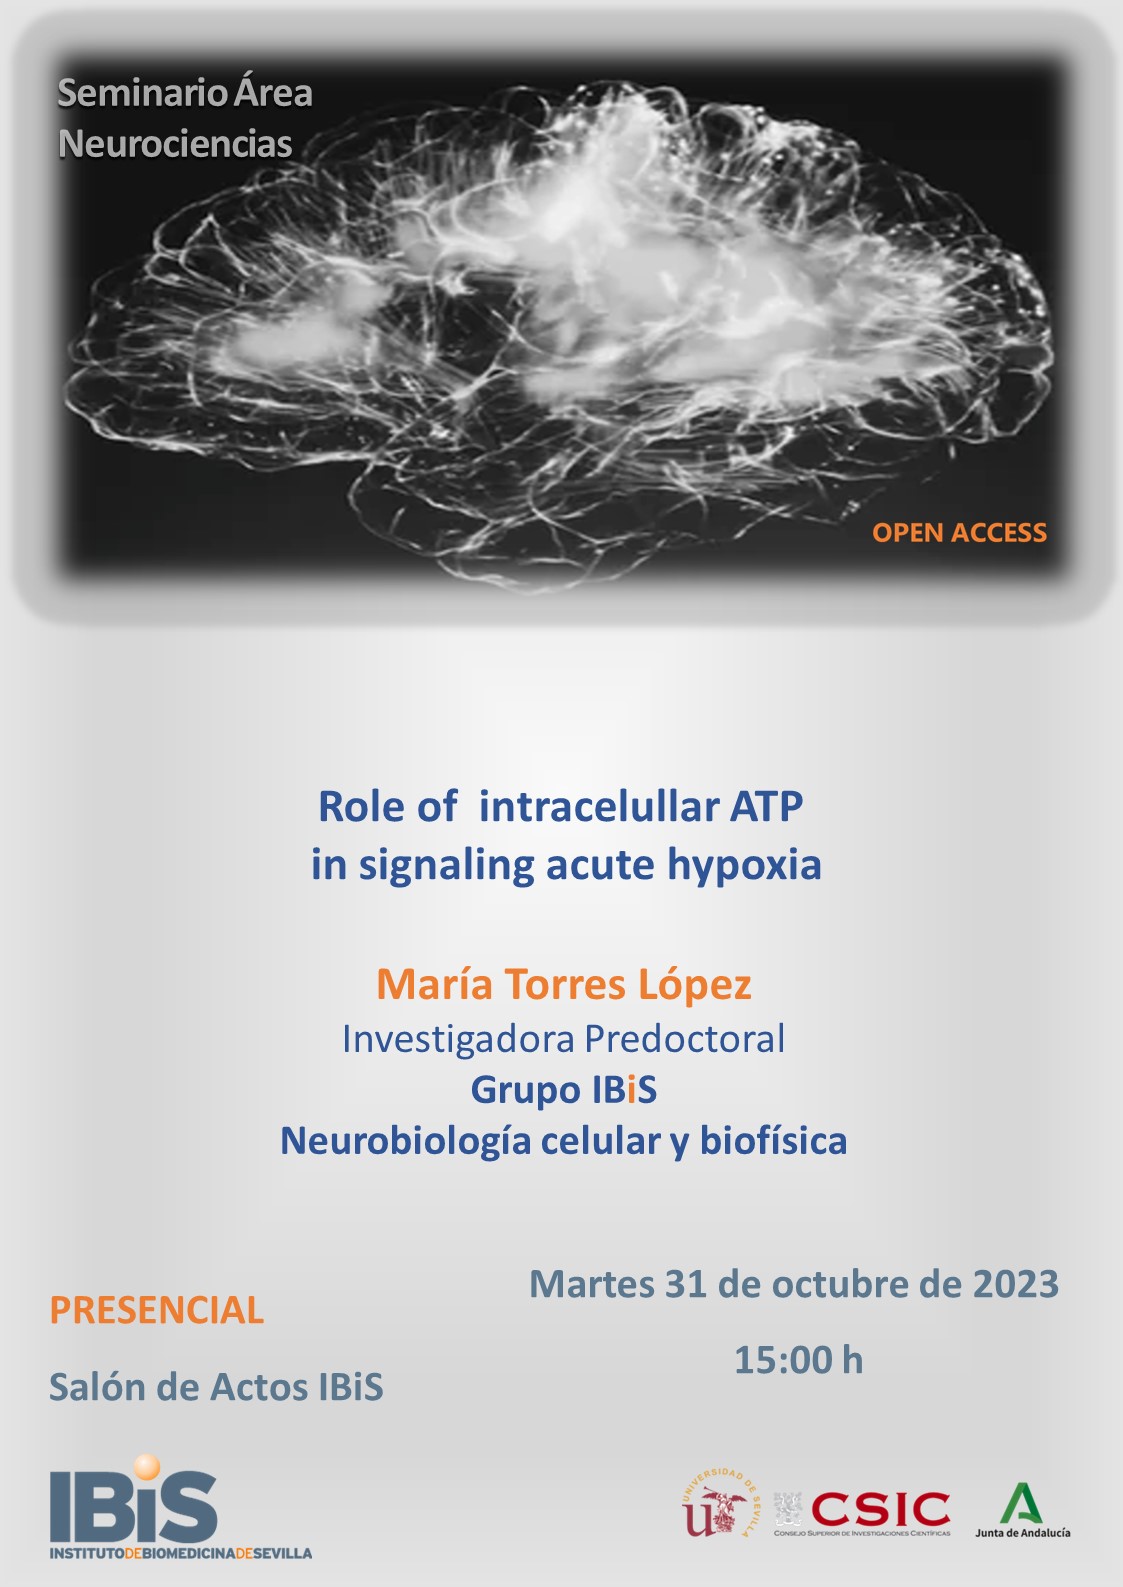 Poster: Role of intracelullar ATP in signaling acute hypoxia